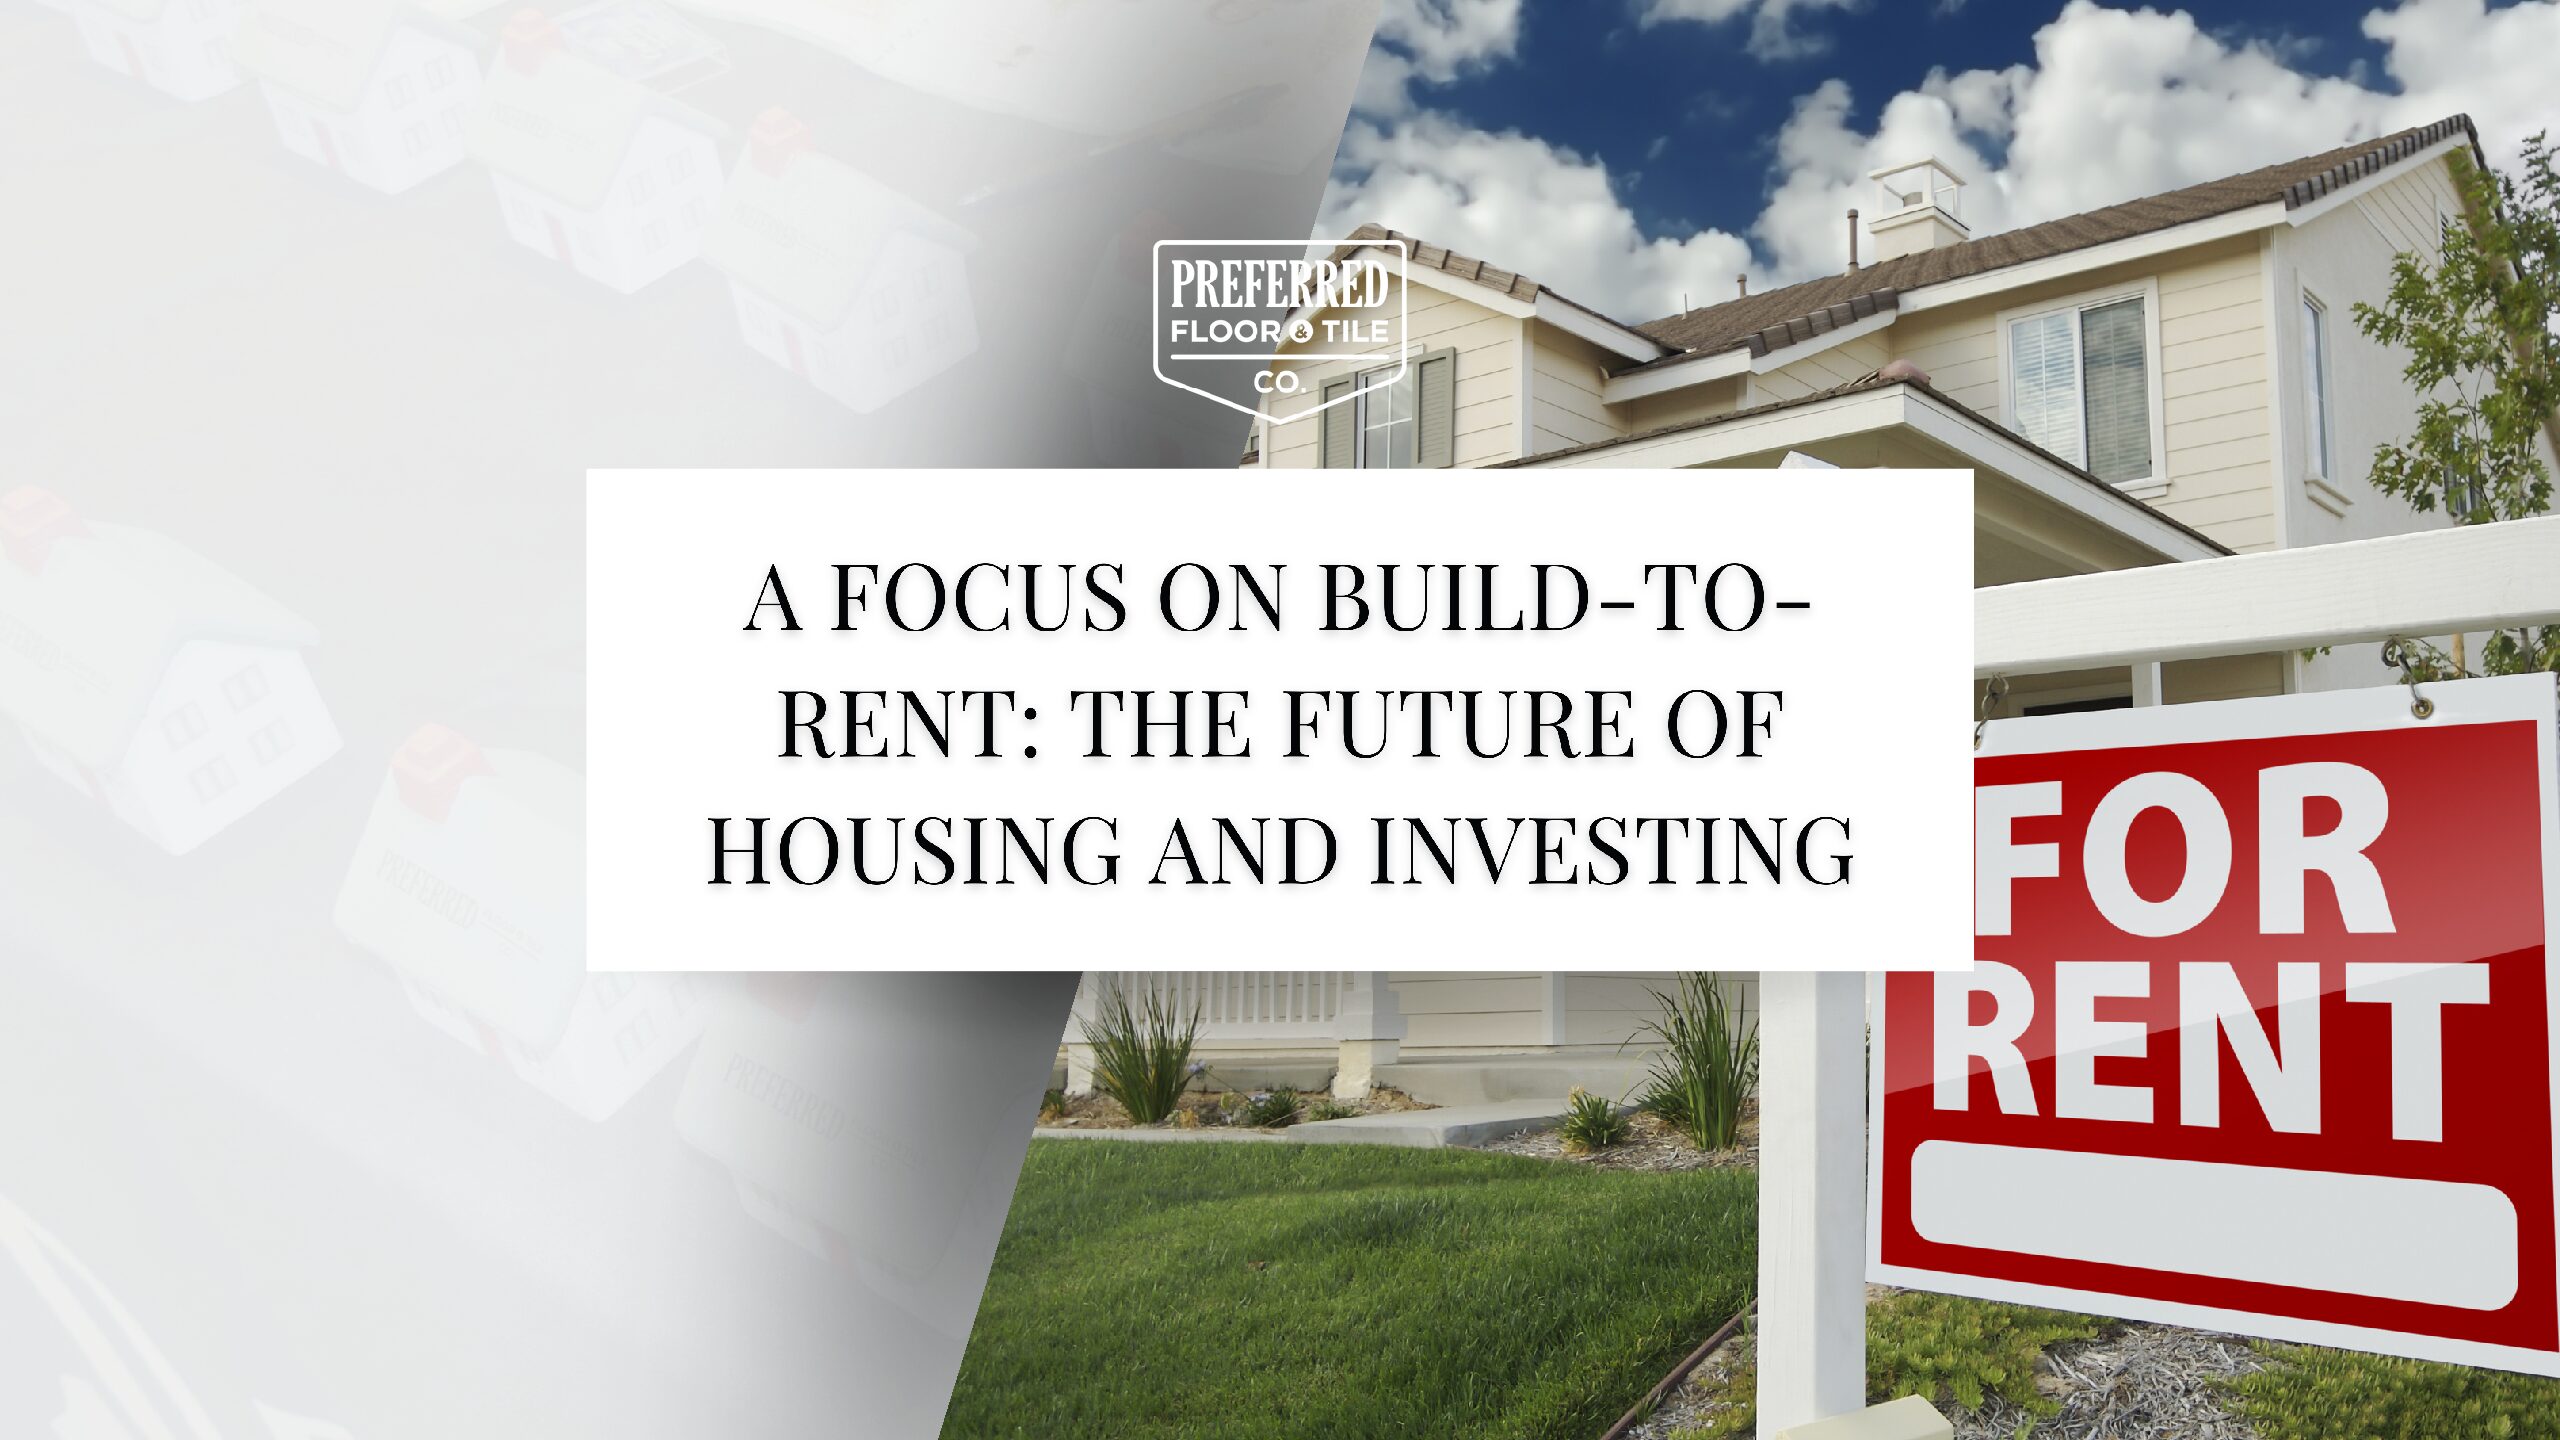 A Focus on Build-to-Rent: The Future of Housing and Investing